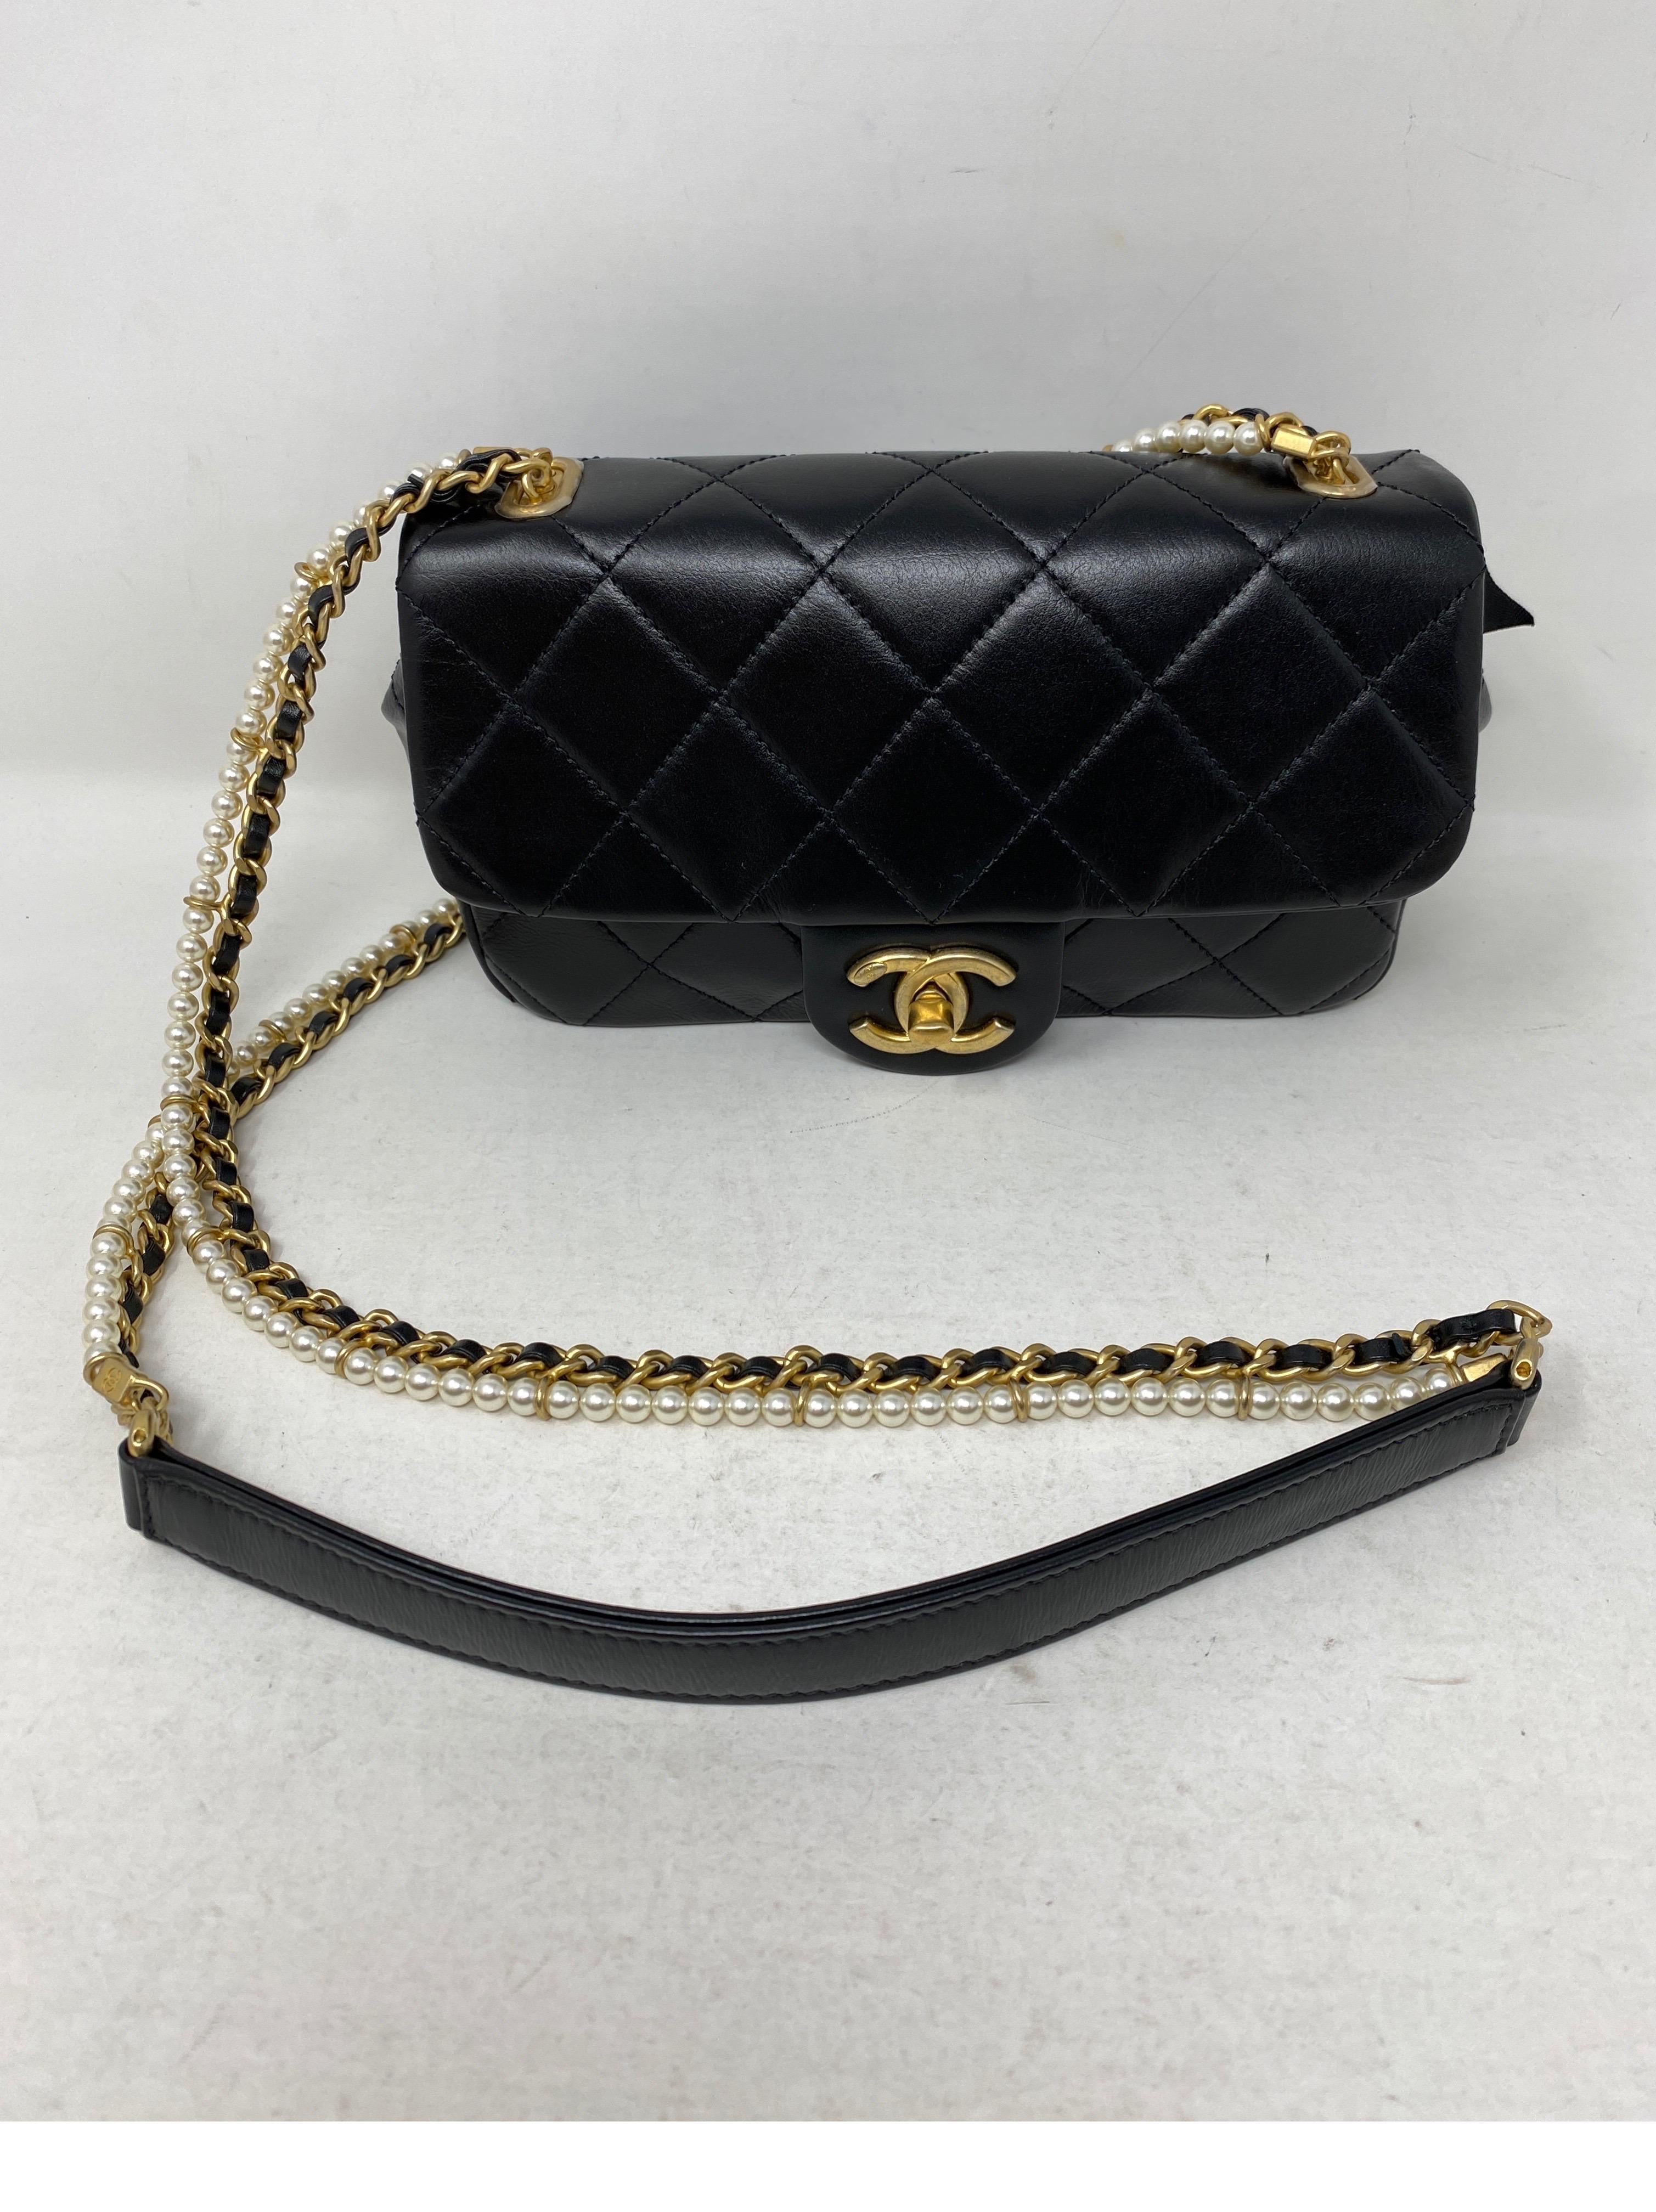 Chanel Black with Pearls Mini Bag. Crossbody bag. Gold hardware. New from 2020 collection. Never worn. Beautiful bag. Pricing for Chanel keeps increasing. Add this to your collection. Includes authenticity card, original receipt, tags, dust cover,